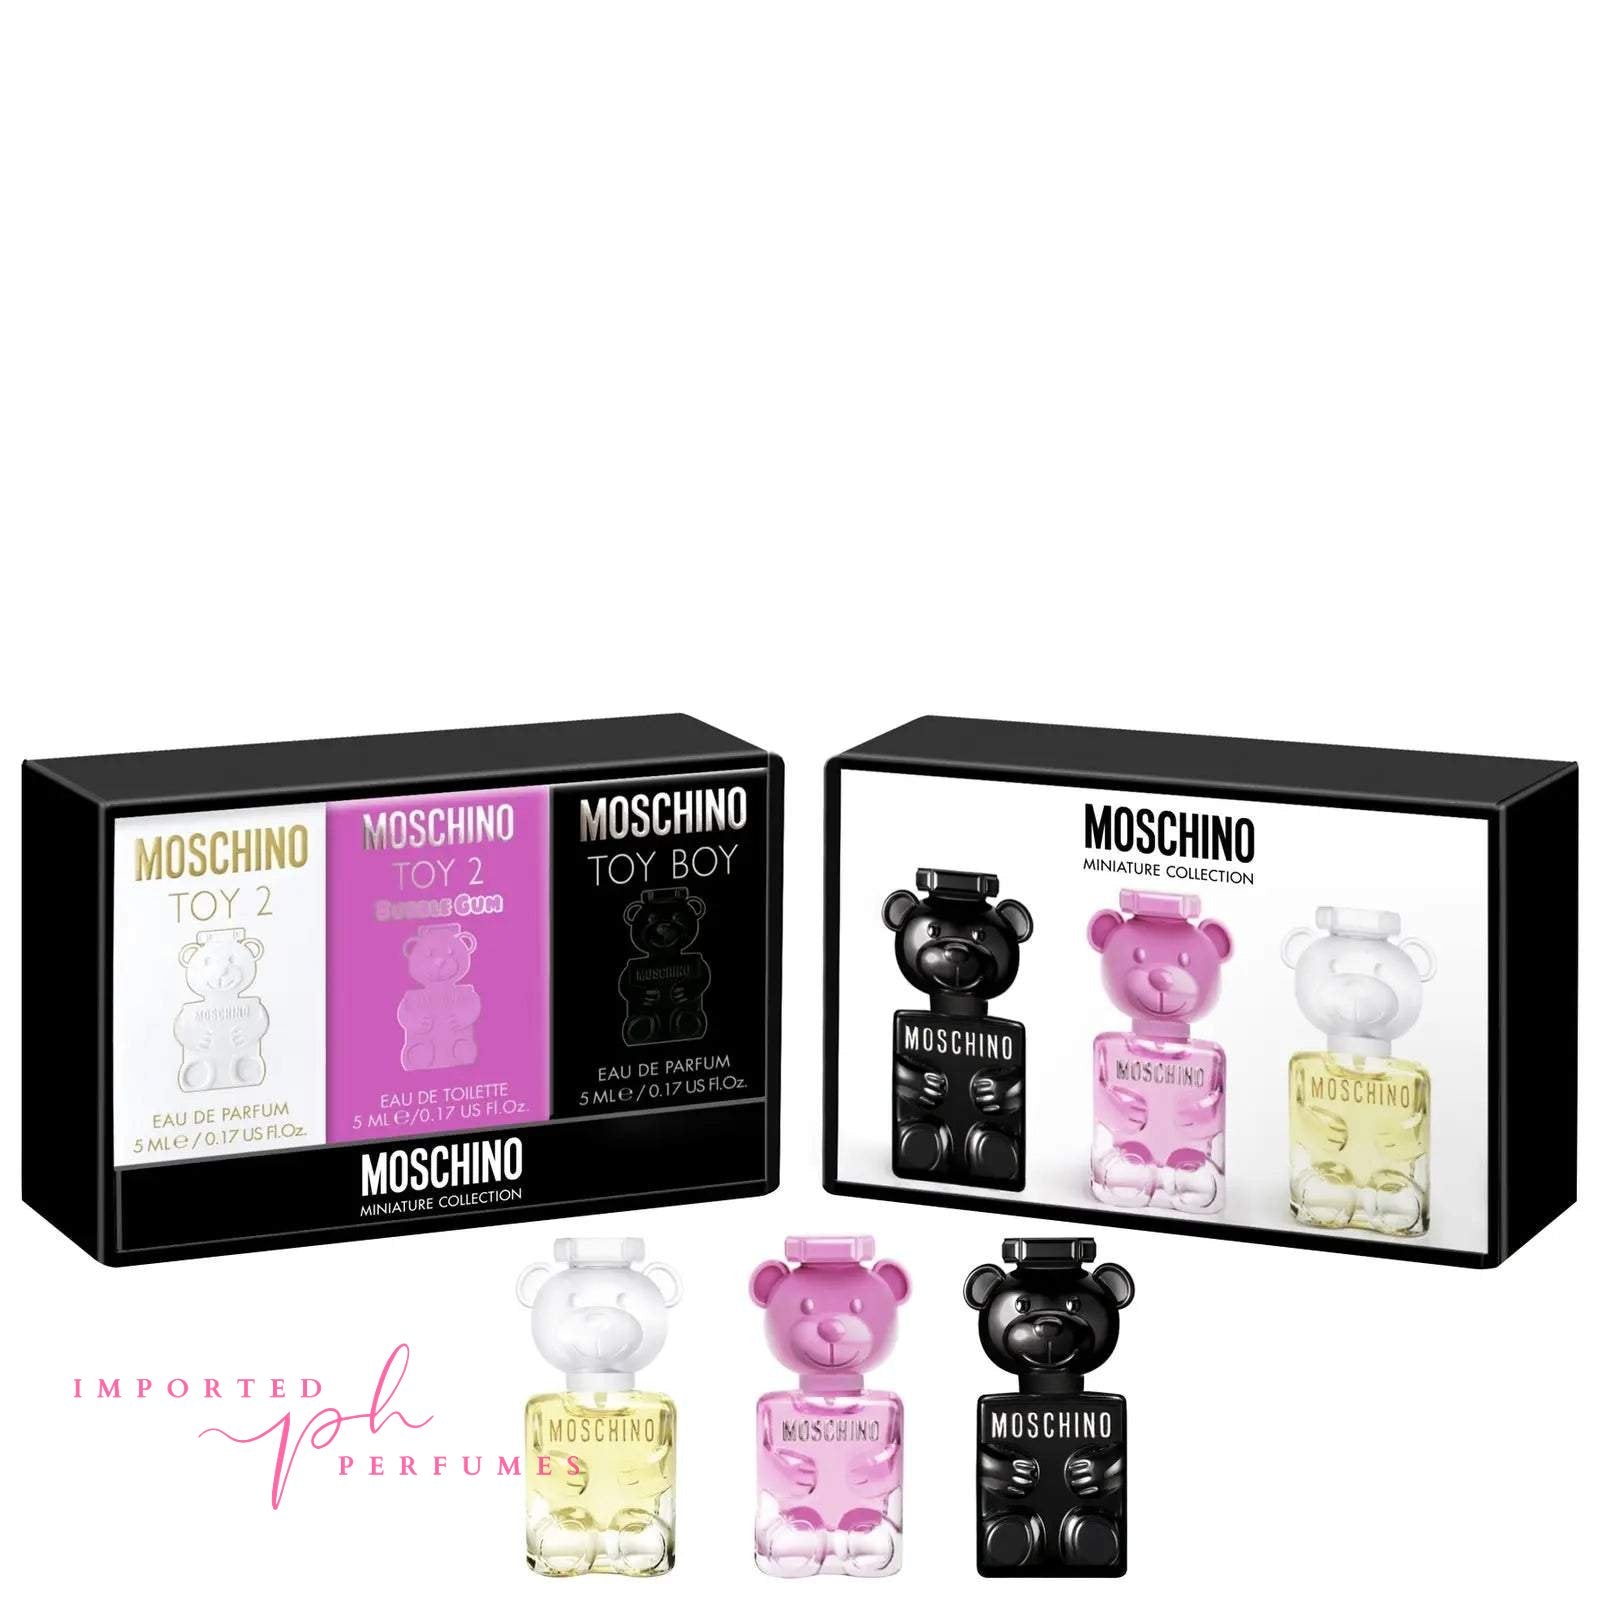 Moschino Gifts & Sets 3 in 1 For Women 30ml x 3-Imported Perfumes Co-gift sets,men sets,Moschino,Moschino Toy 2,sets,Women